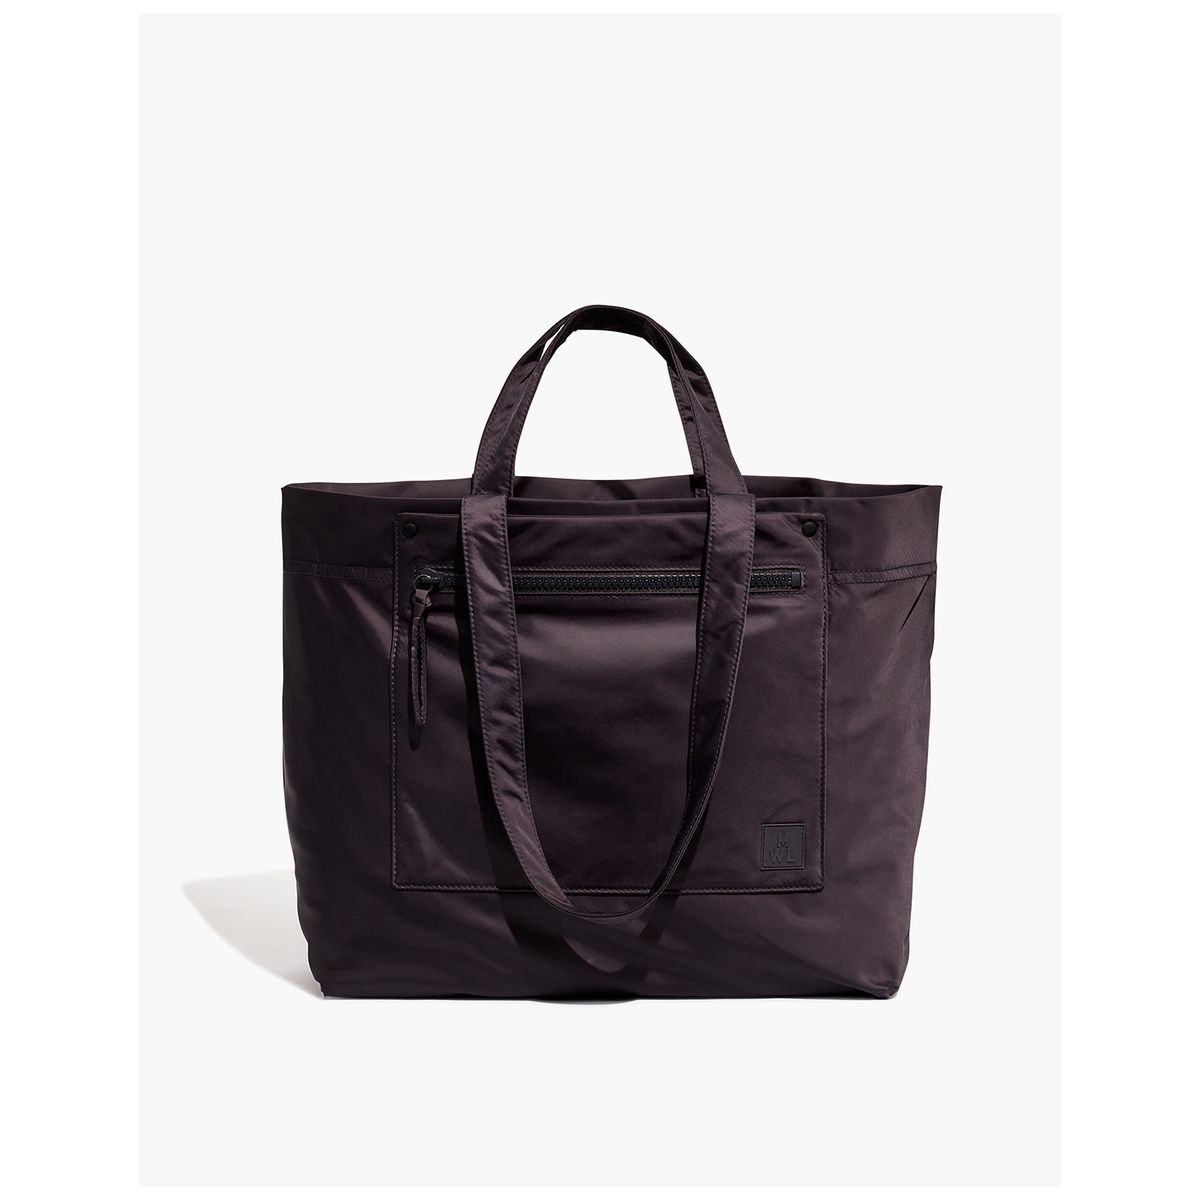 The (Re)sourced Tote Bag in Coal